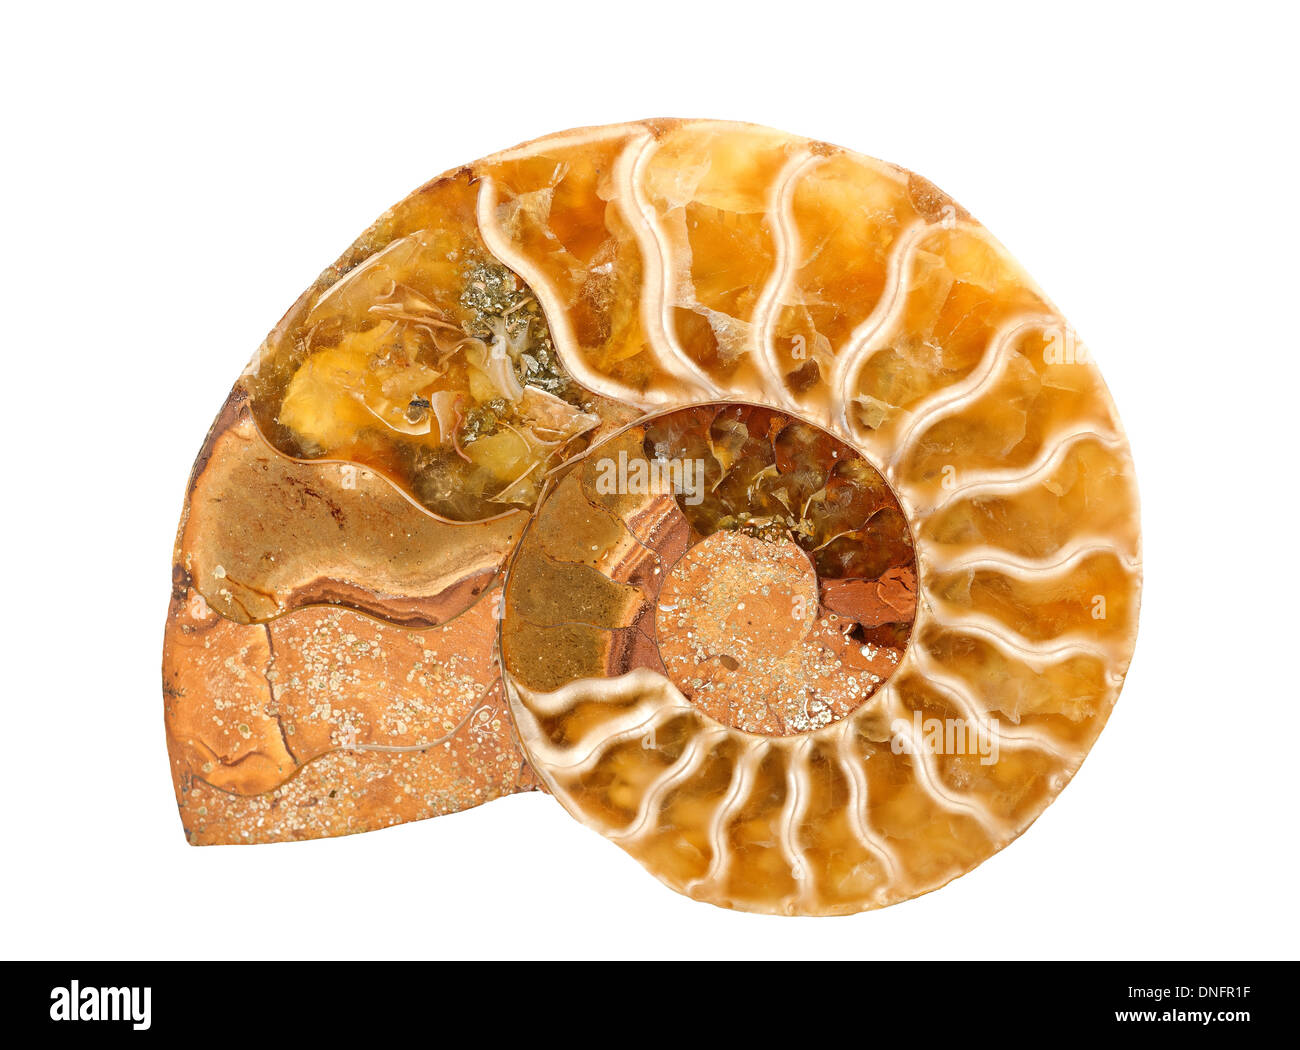 Pierre d'ammonites isolated on white Banque D'Images